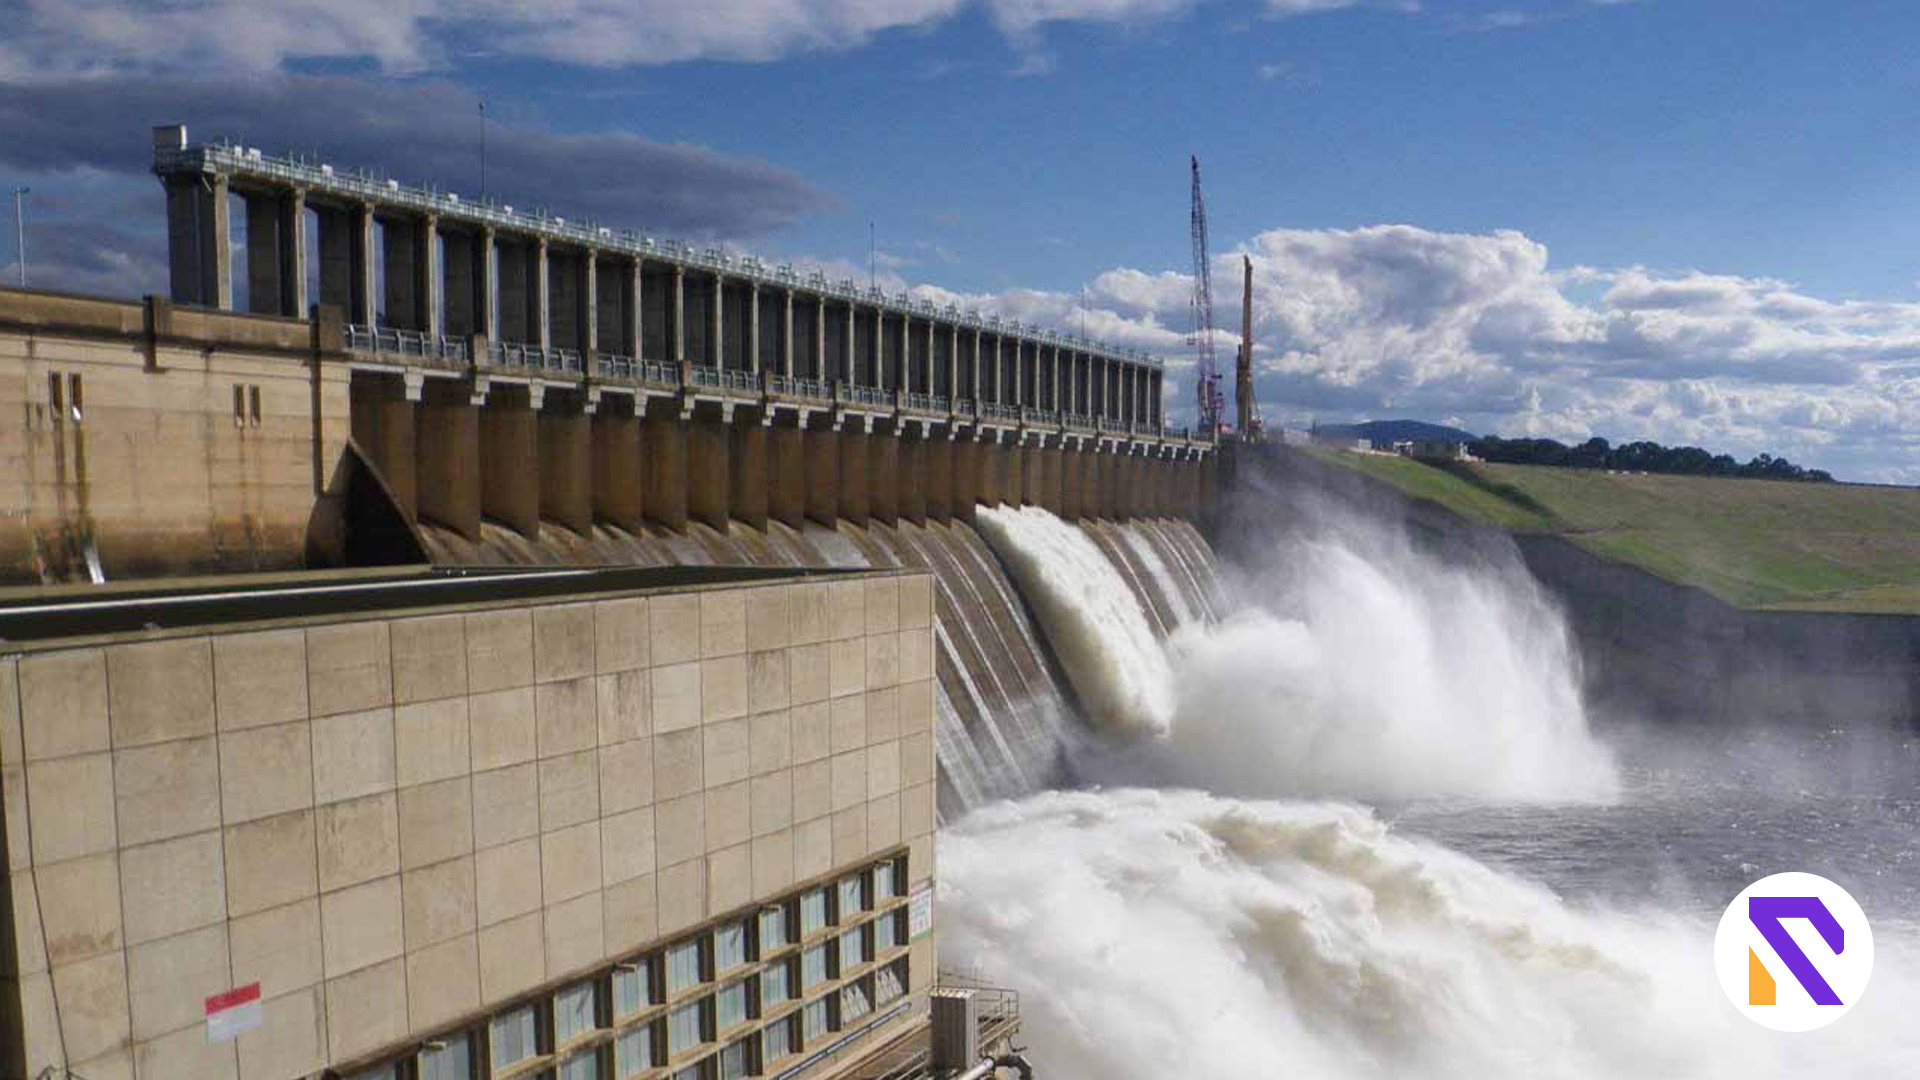 Winder Dam Project of 3 MW Capacity to be Completed in 2025